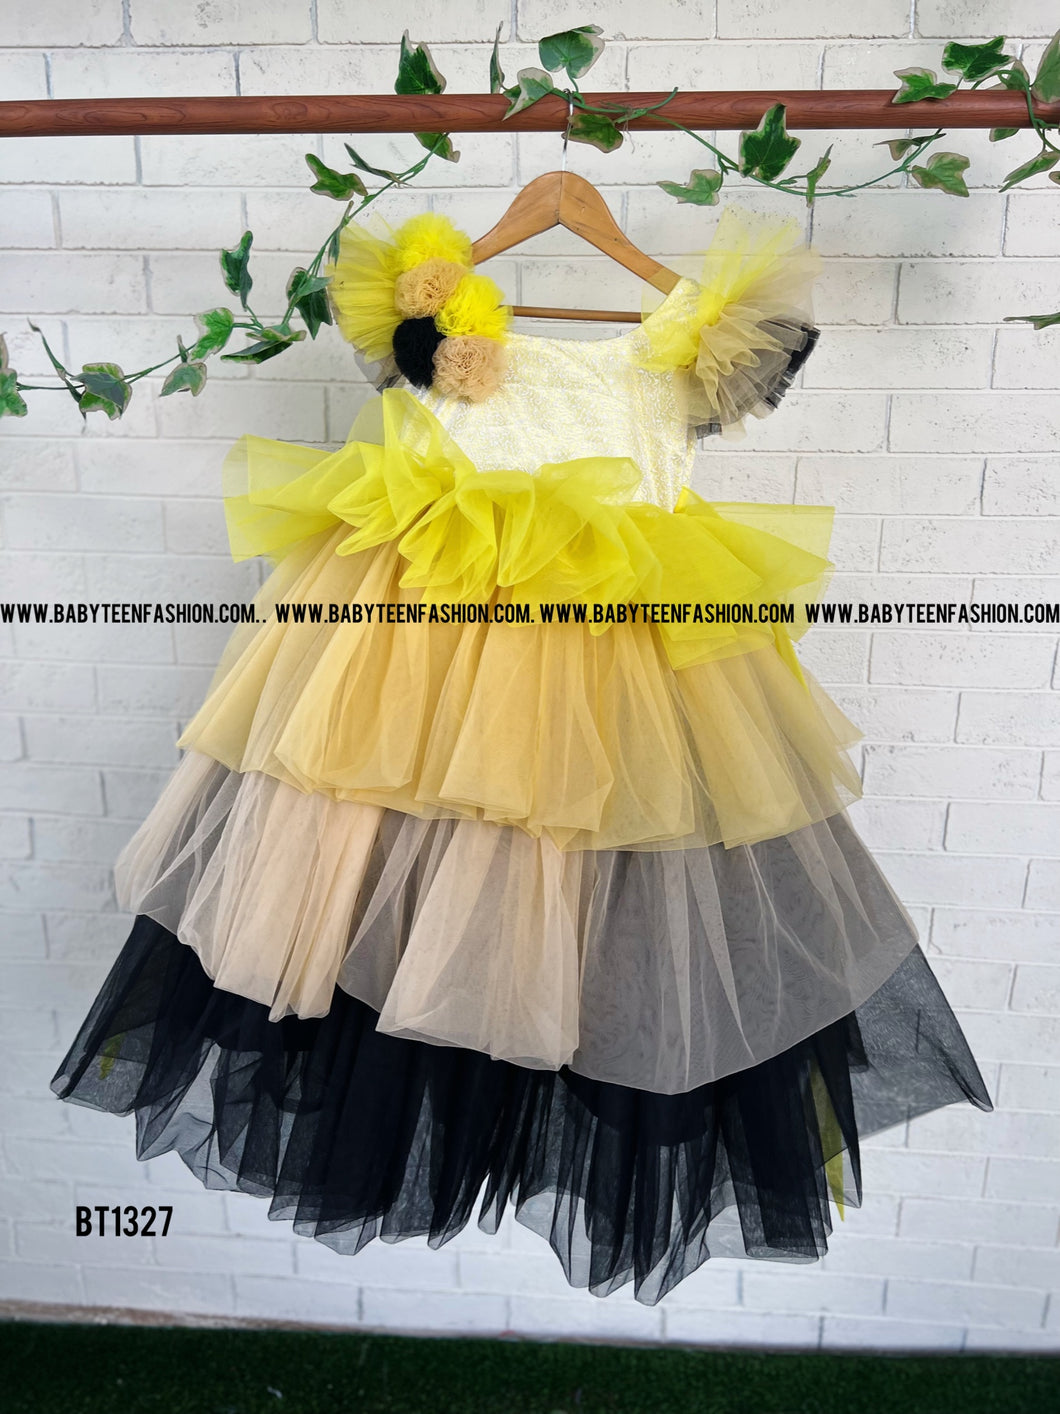 BT1327 Multicolour Party Wear Frock with Embellished Hand Made Flowers